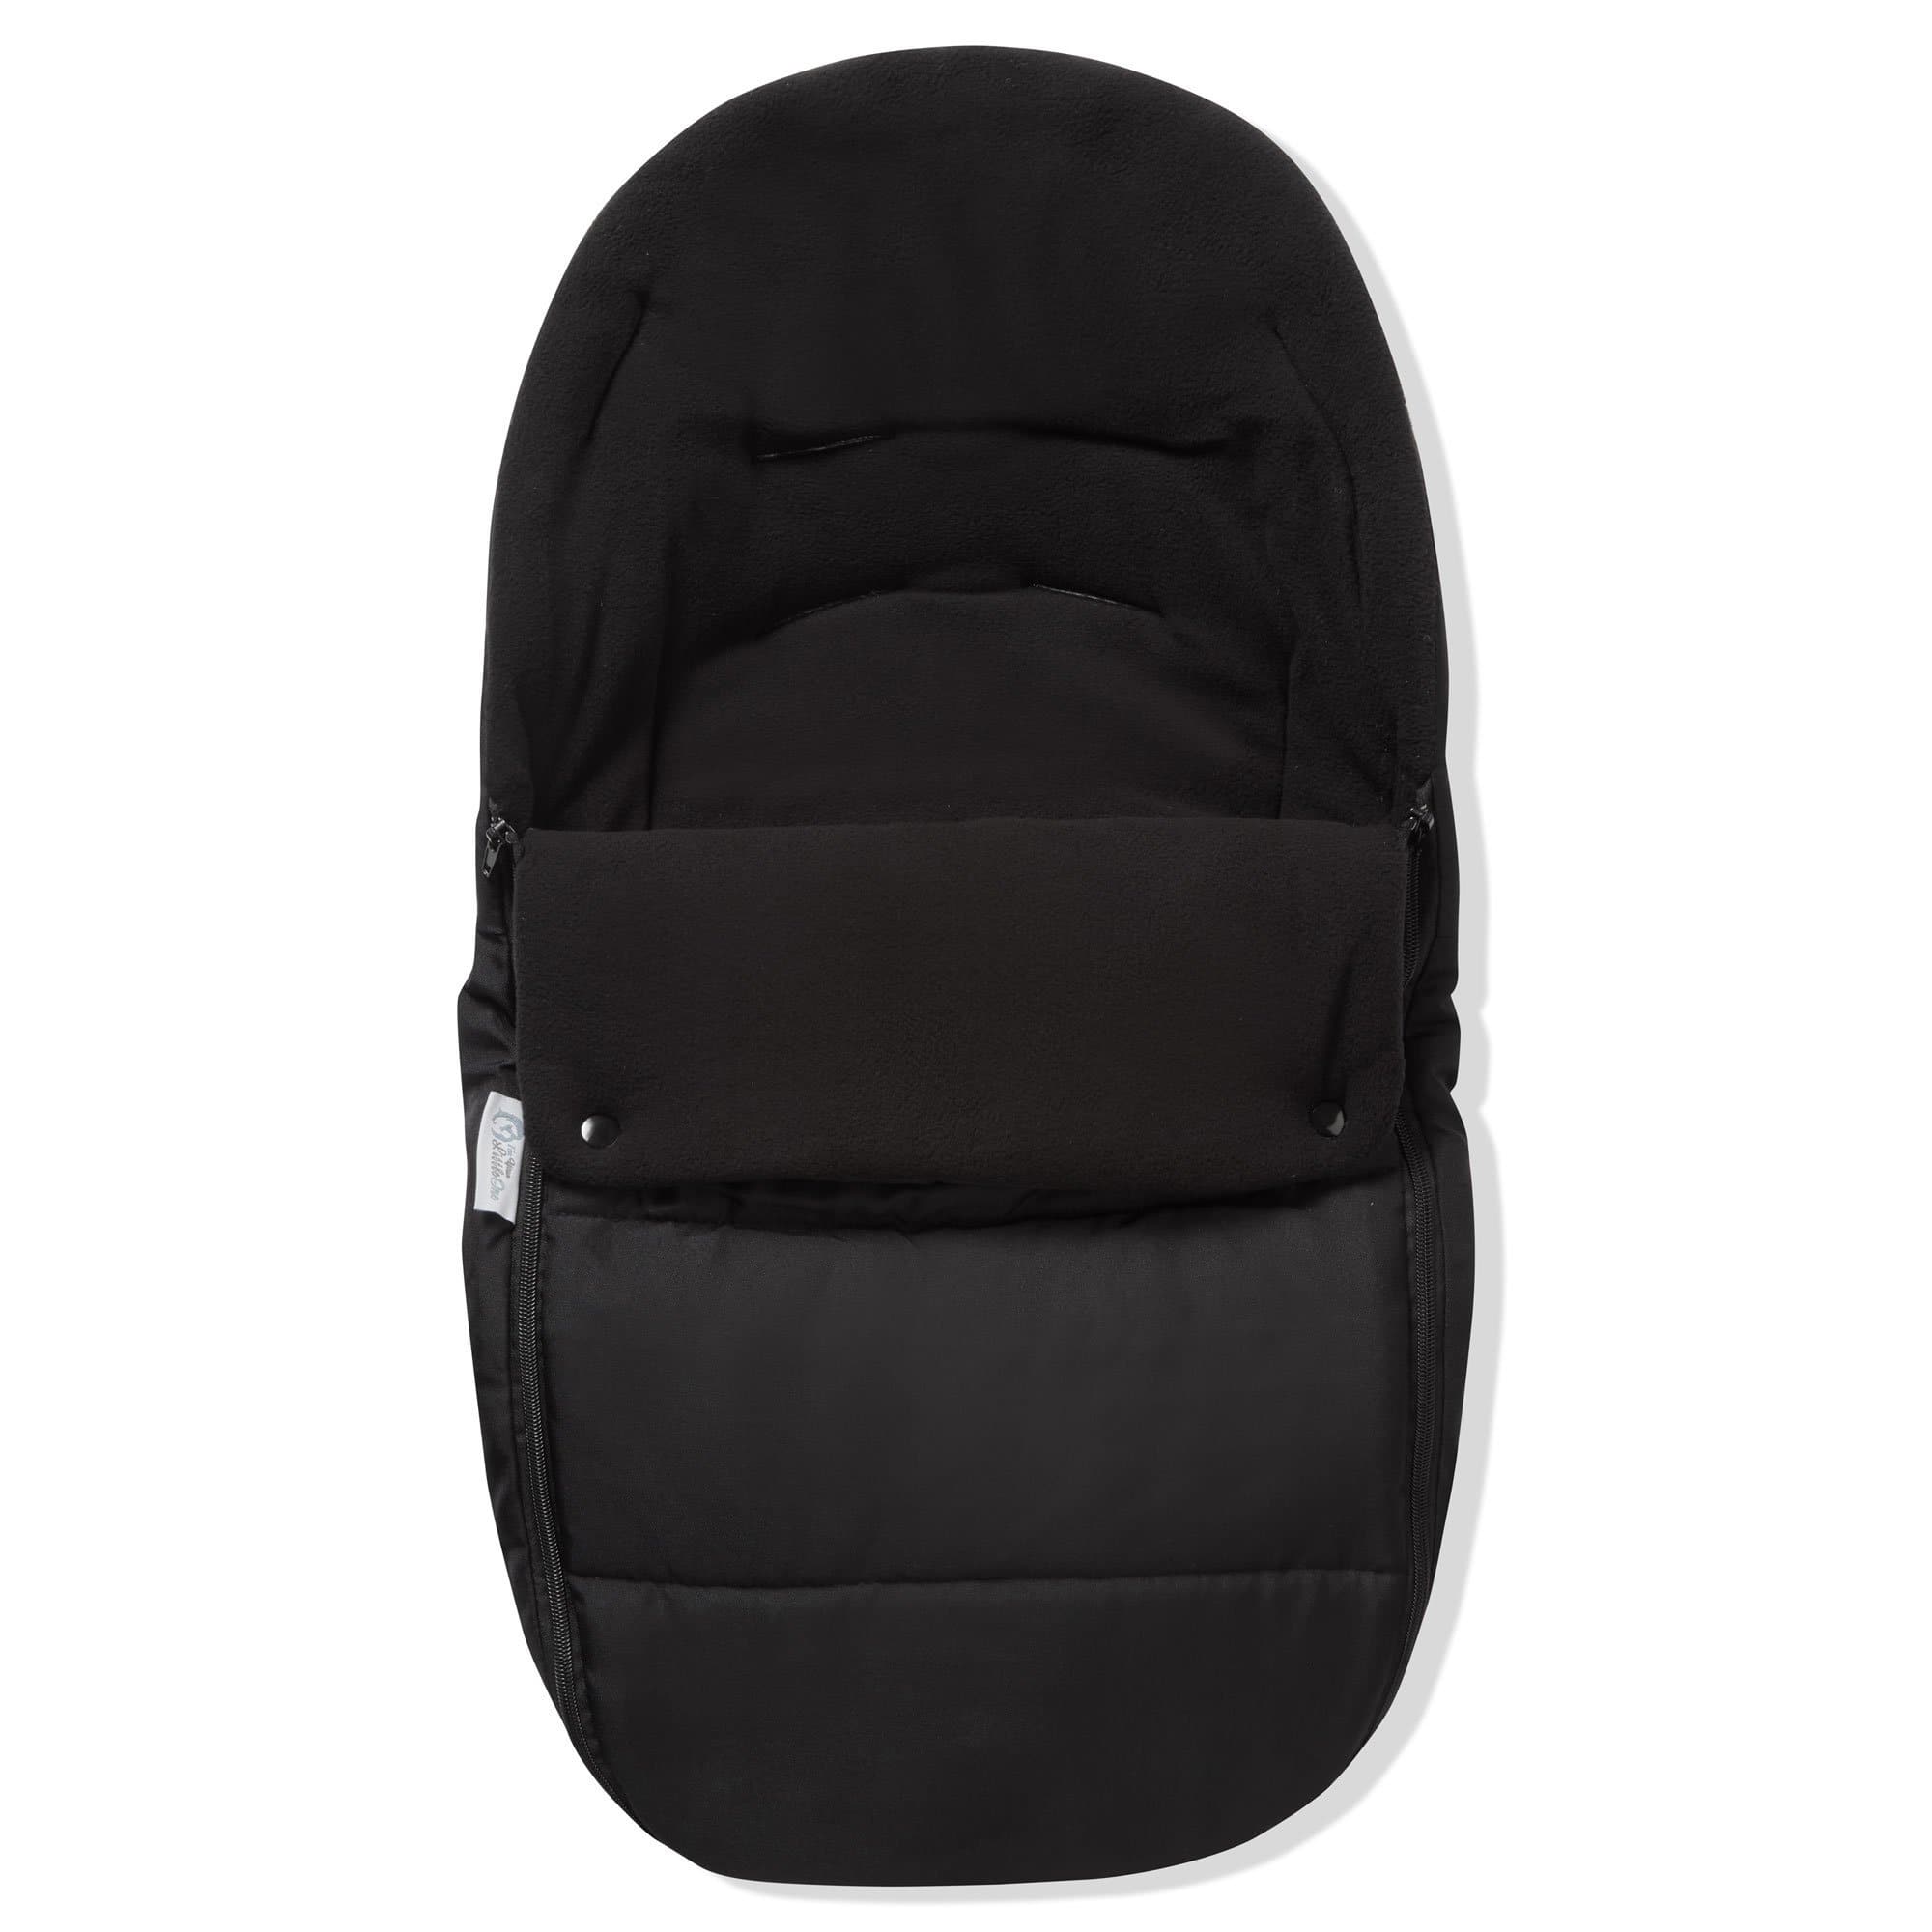 Premium Car Seat Footmuff / Cosy Toes Compatible With GB - Black Jack / Fits All Models | For Your Little One